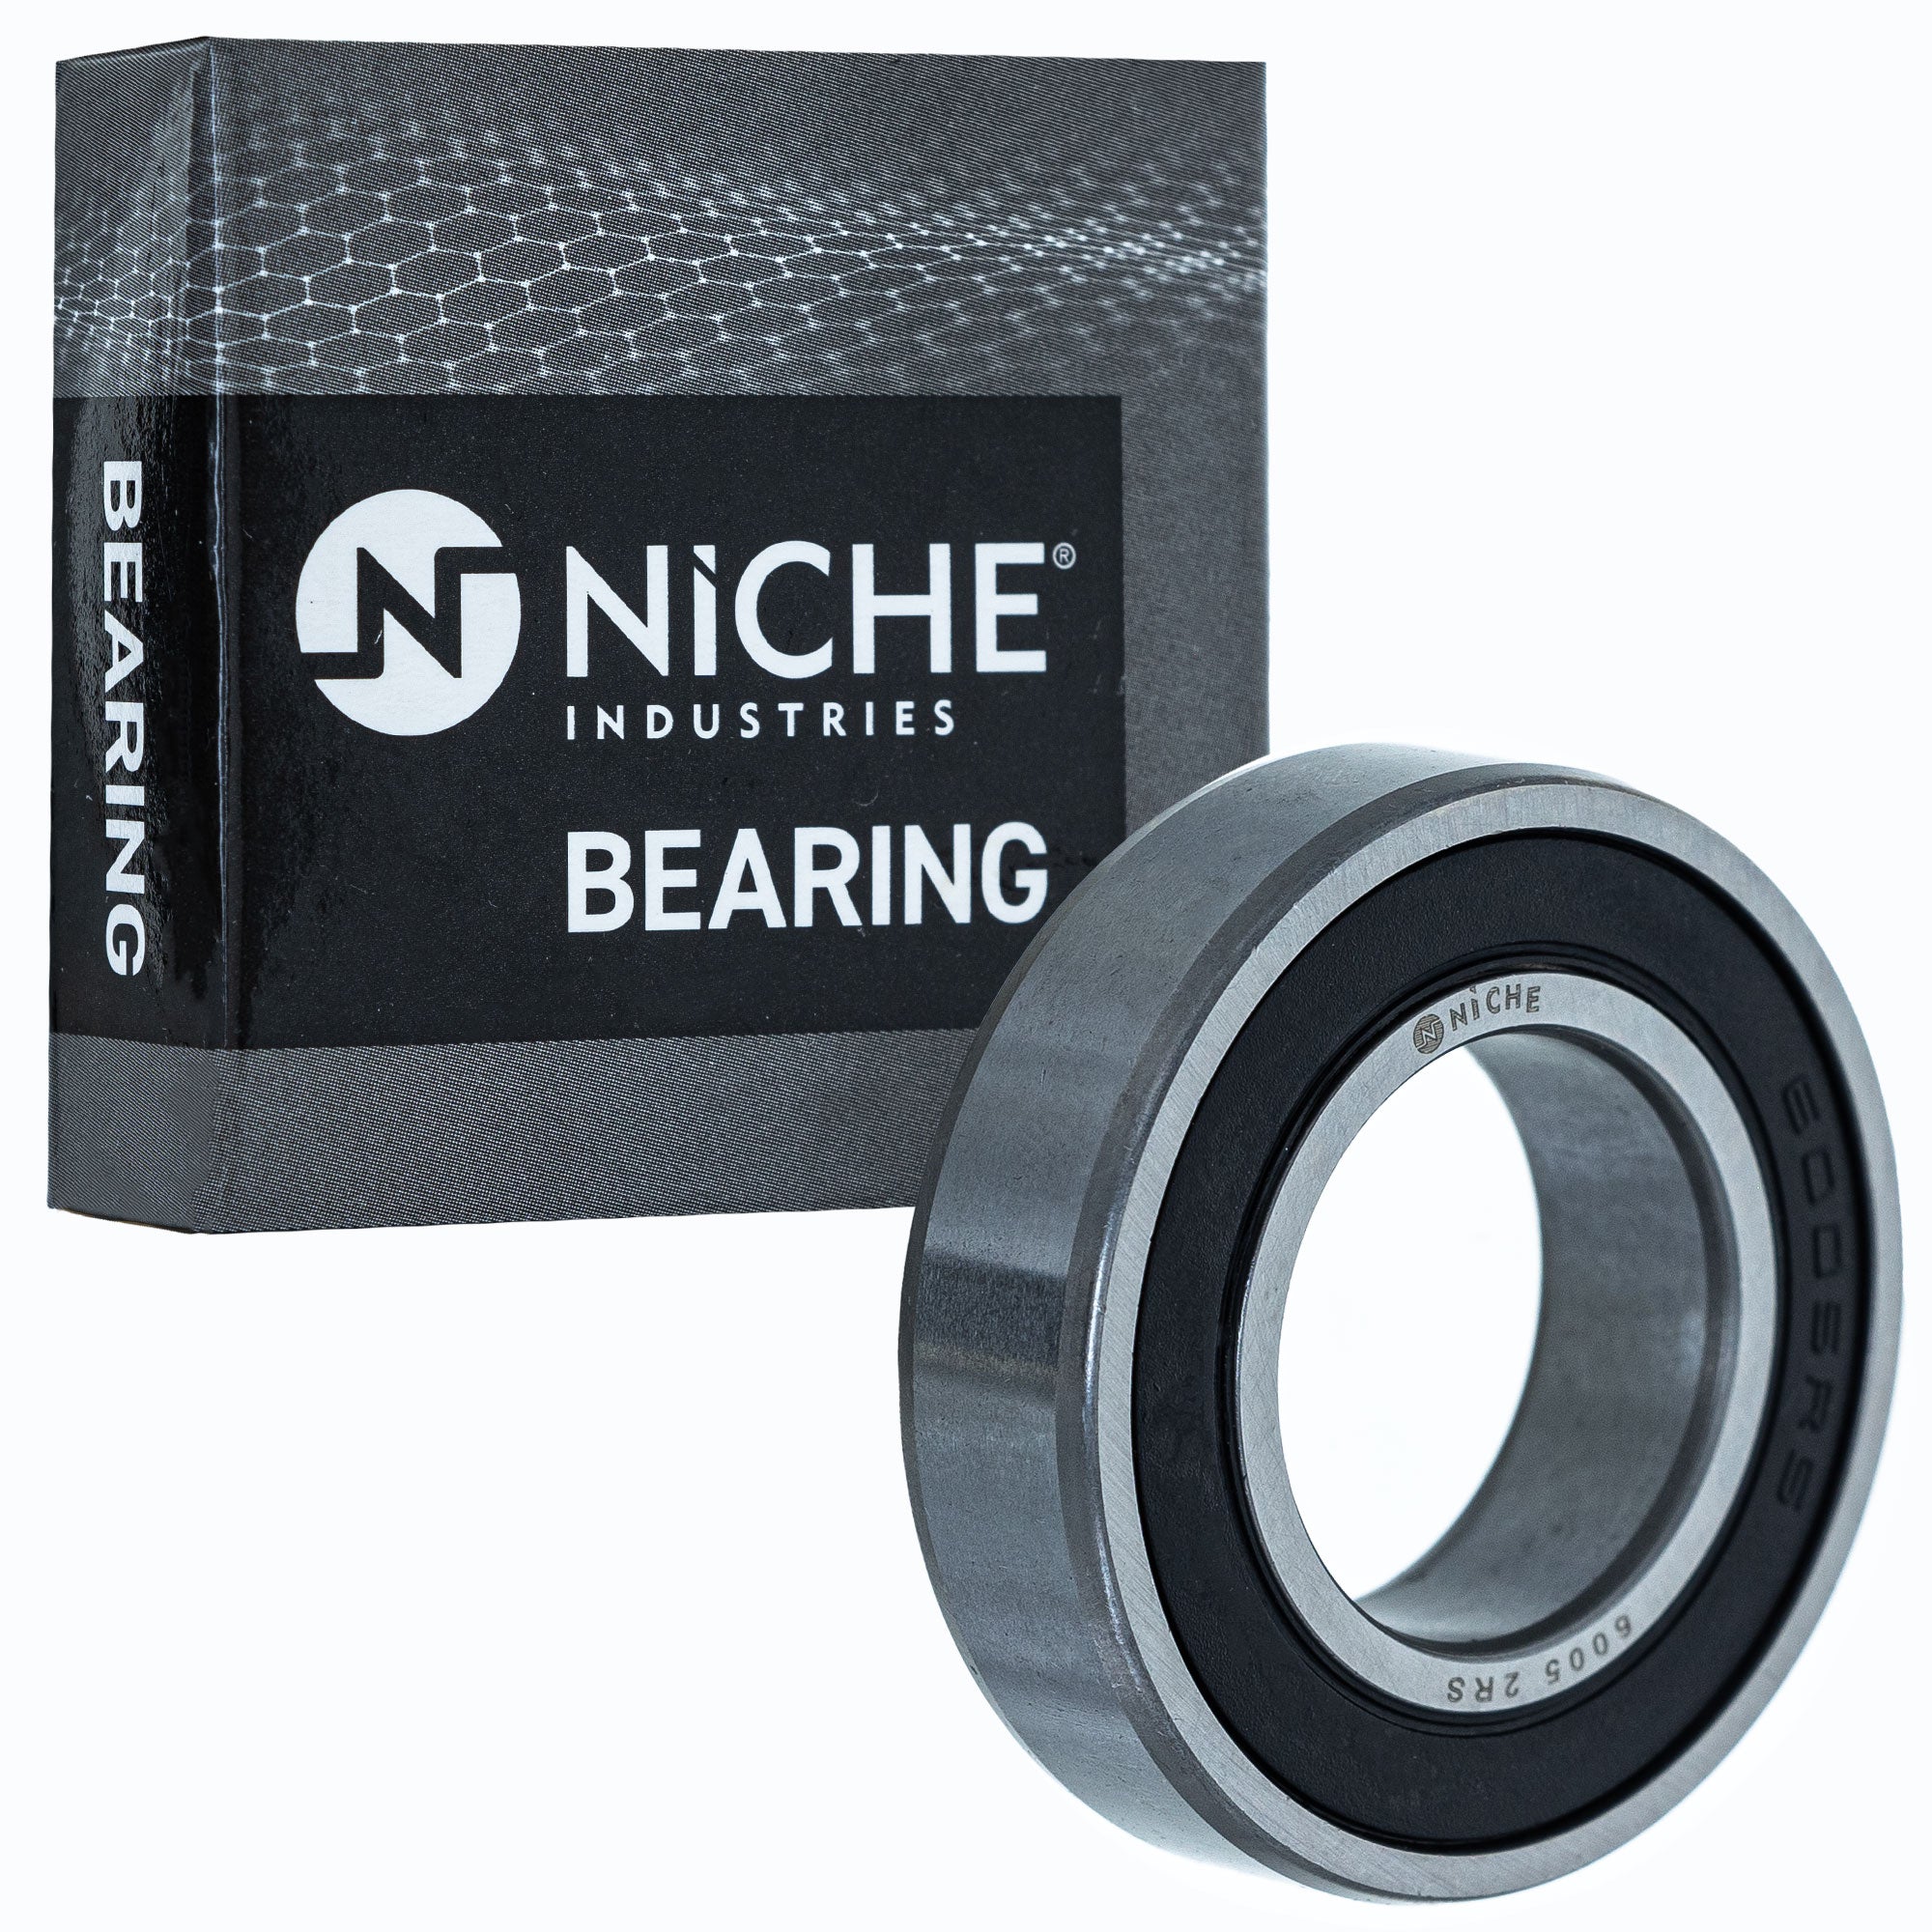 NICHE 519-CBB2234R Bearing & Seal Kit 10-Pack for zOTHER RVT1000R